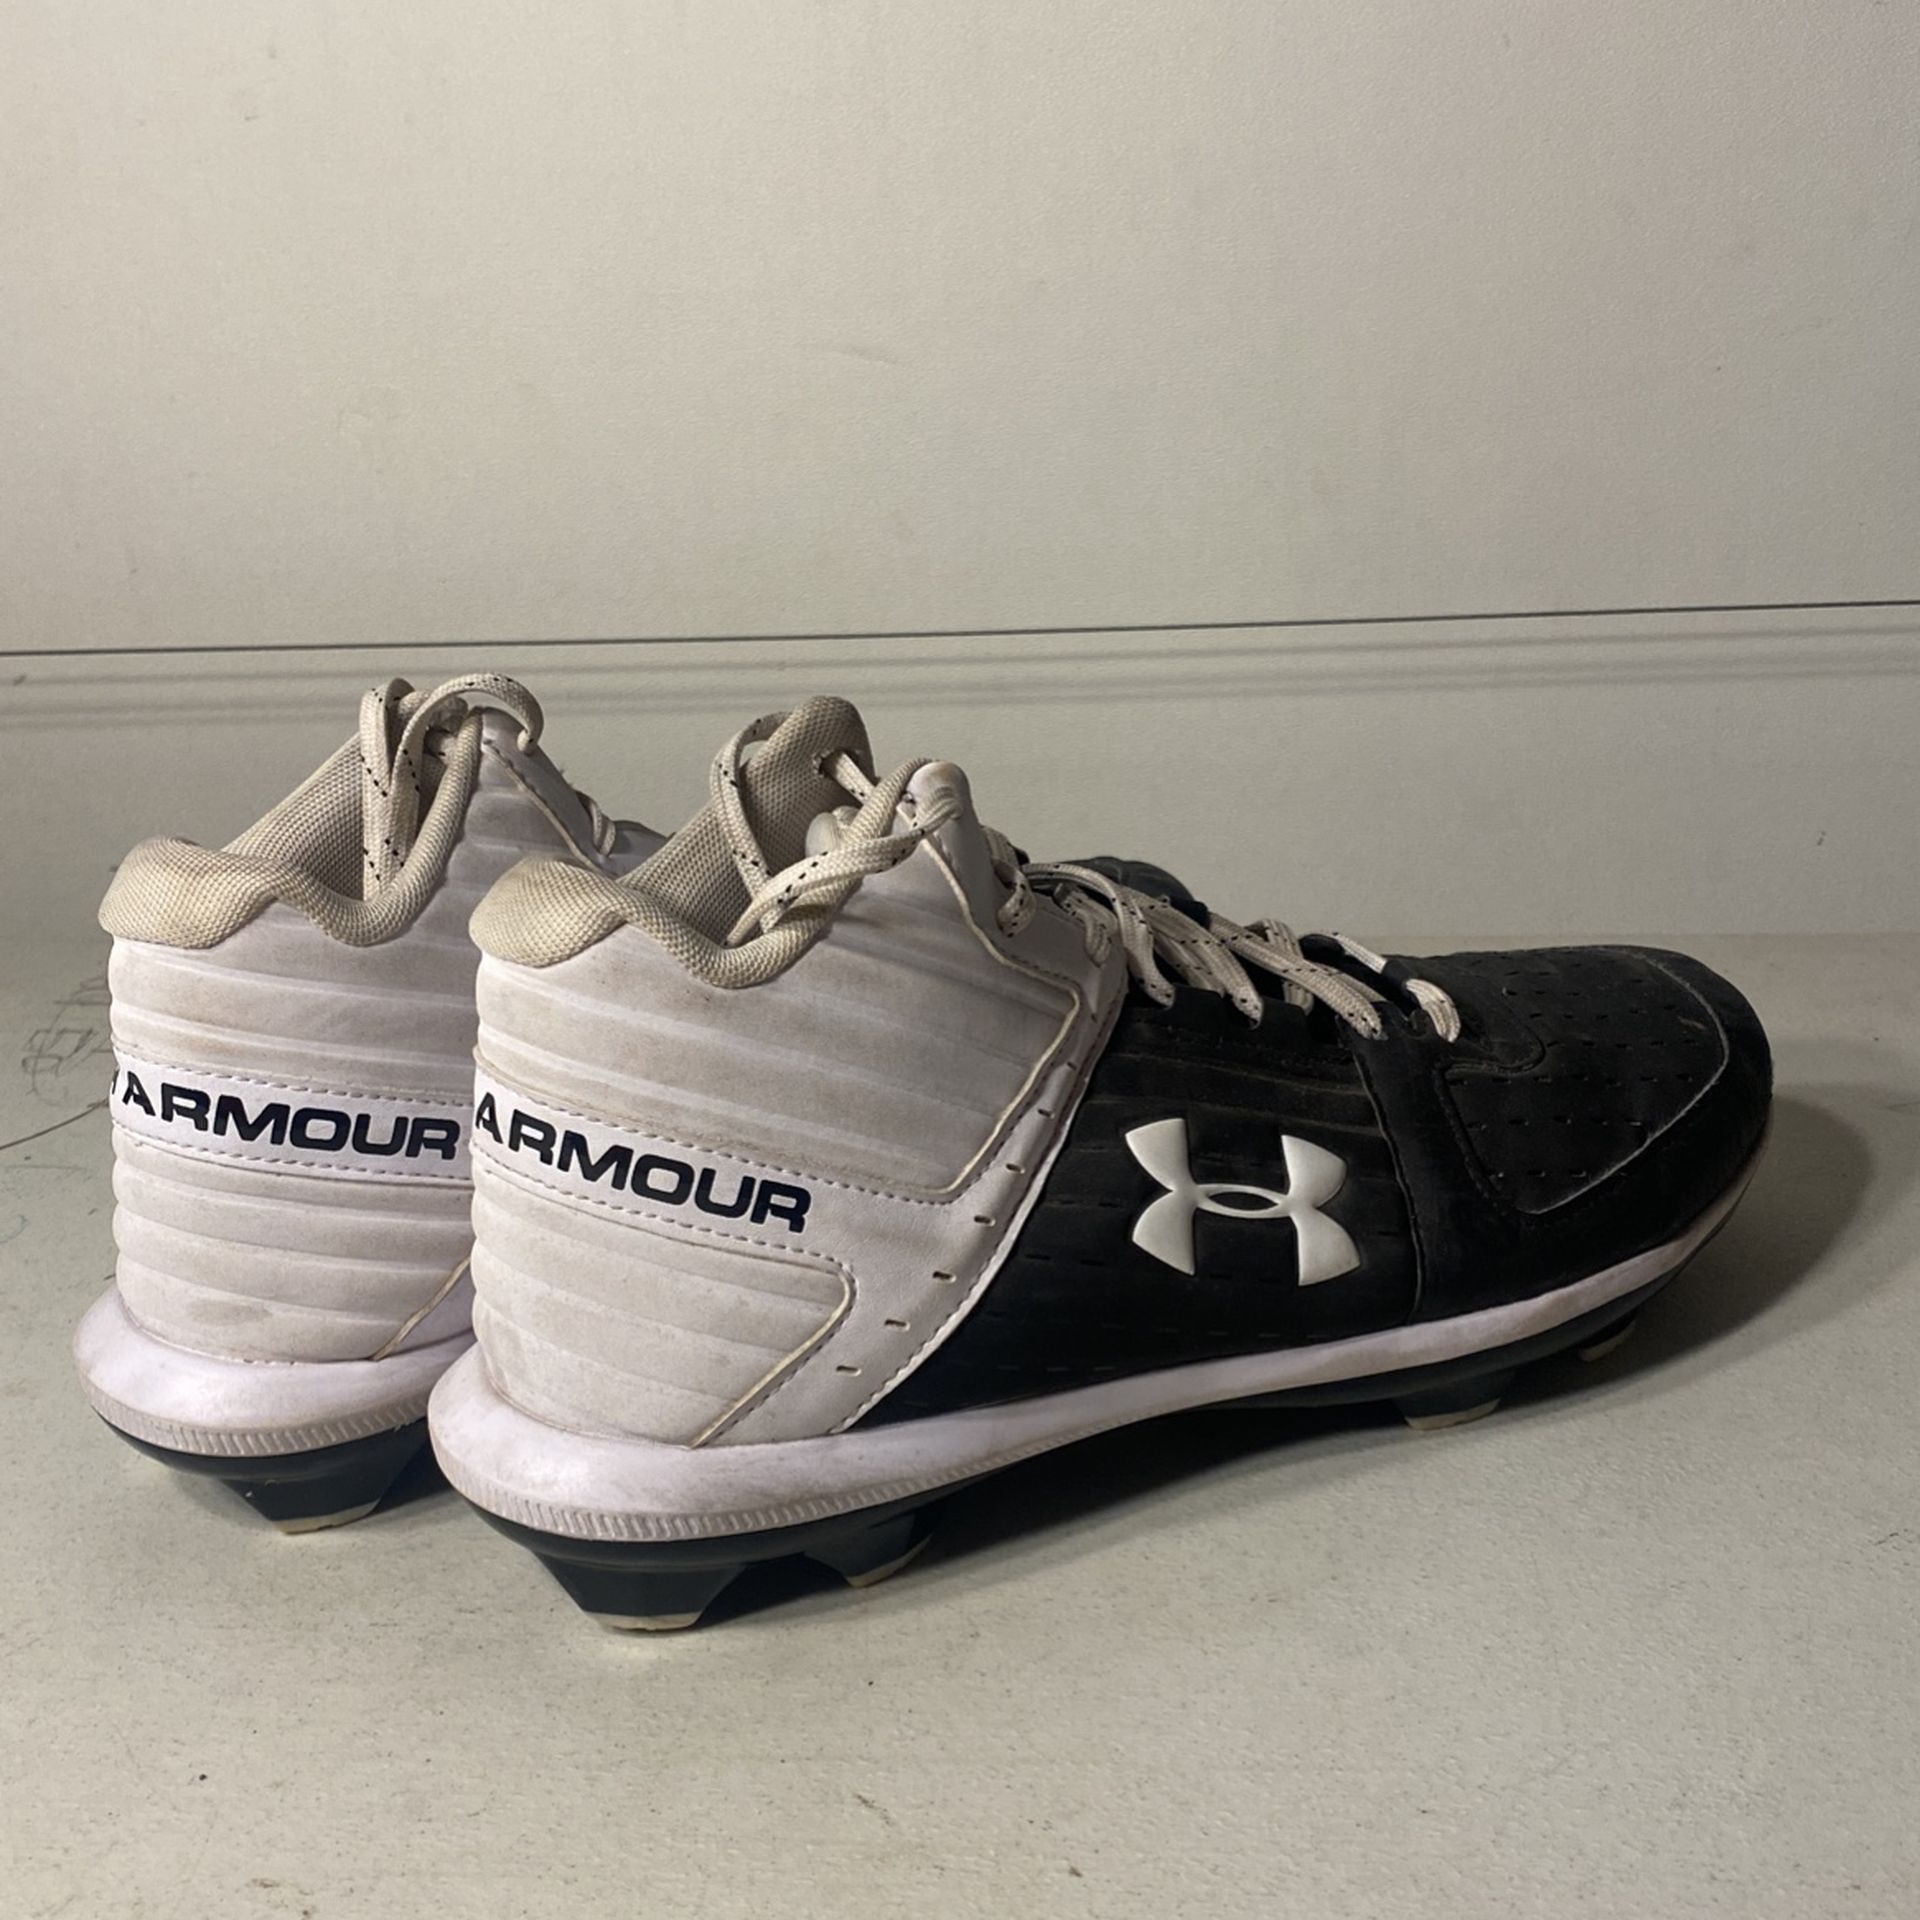  UnderArmour Molded cleats